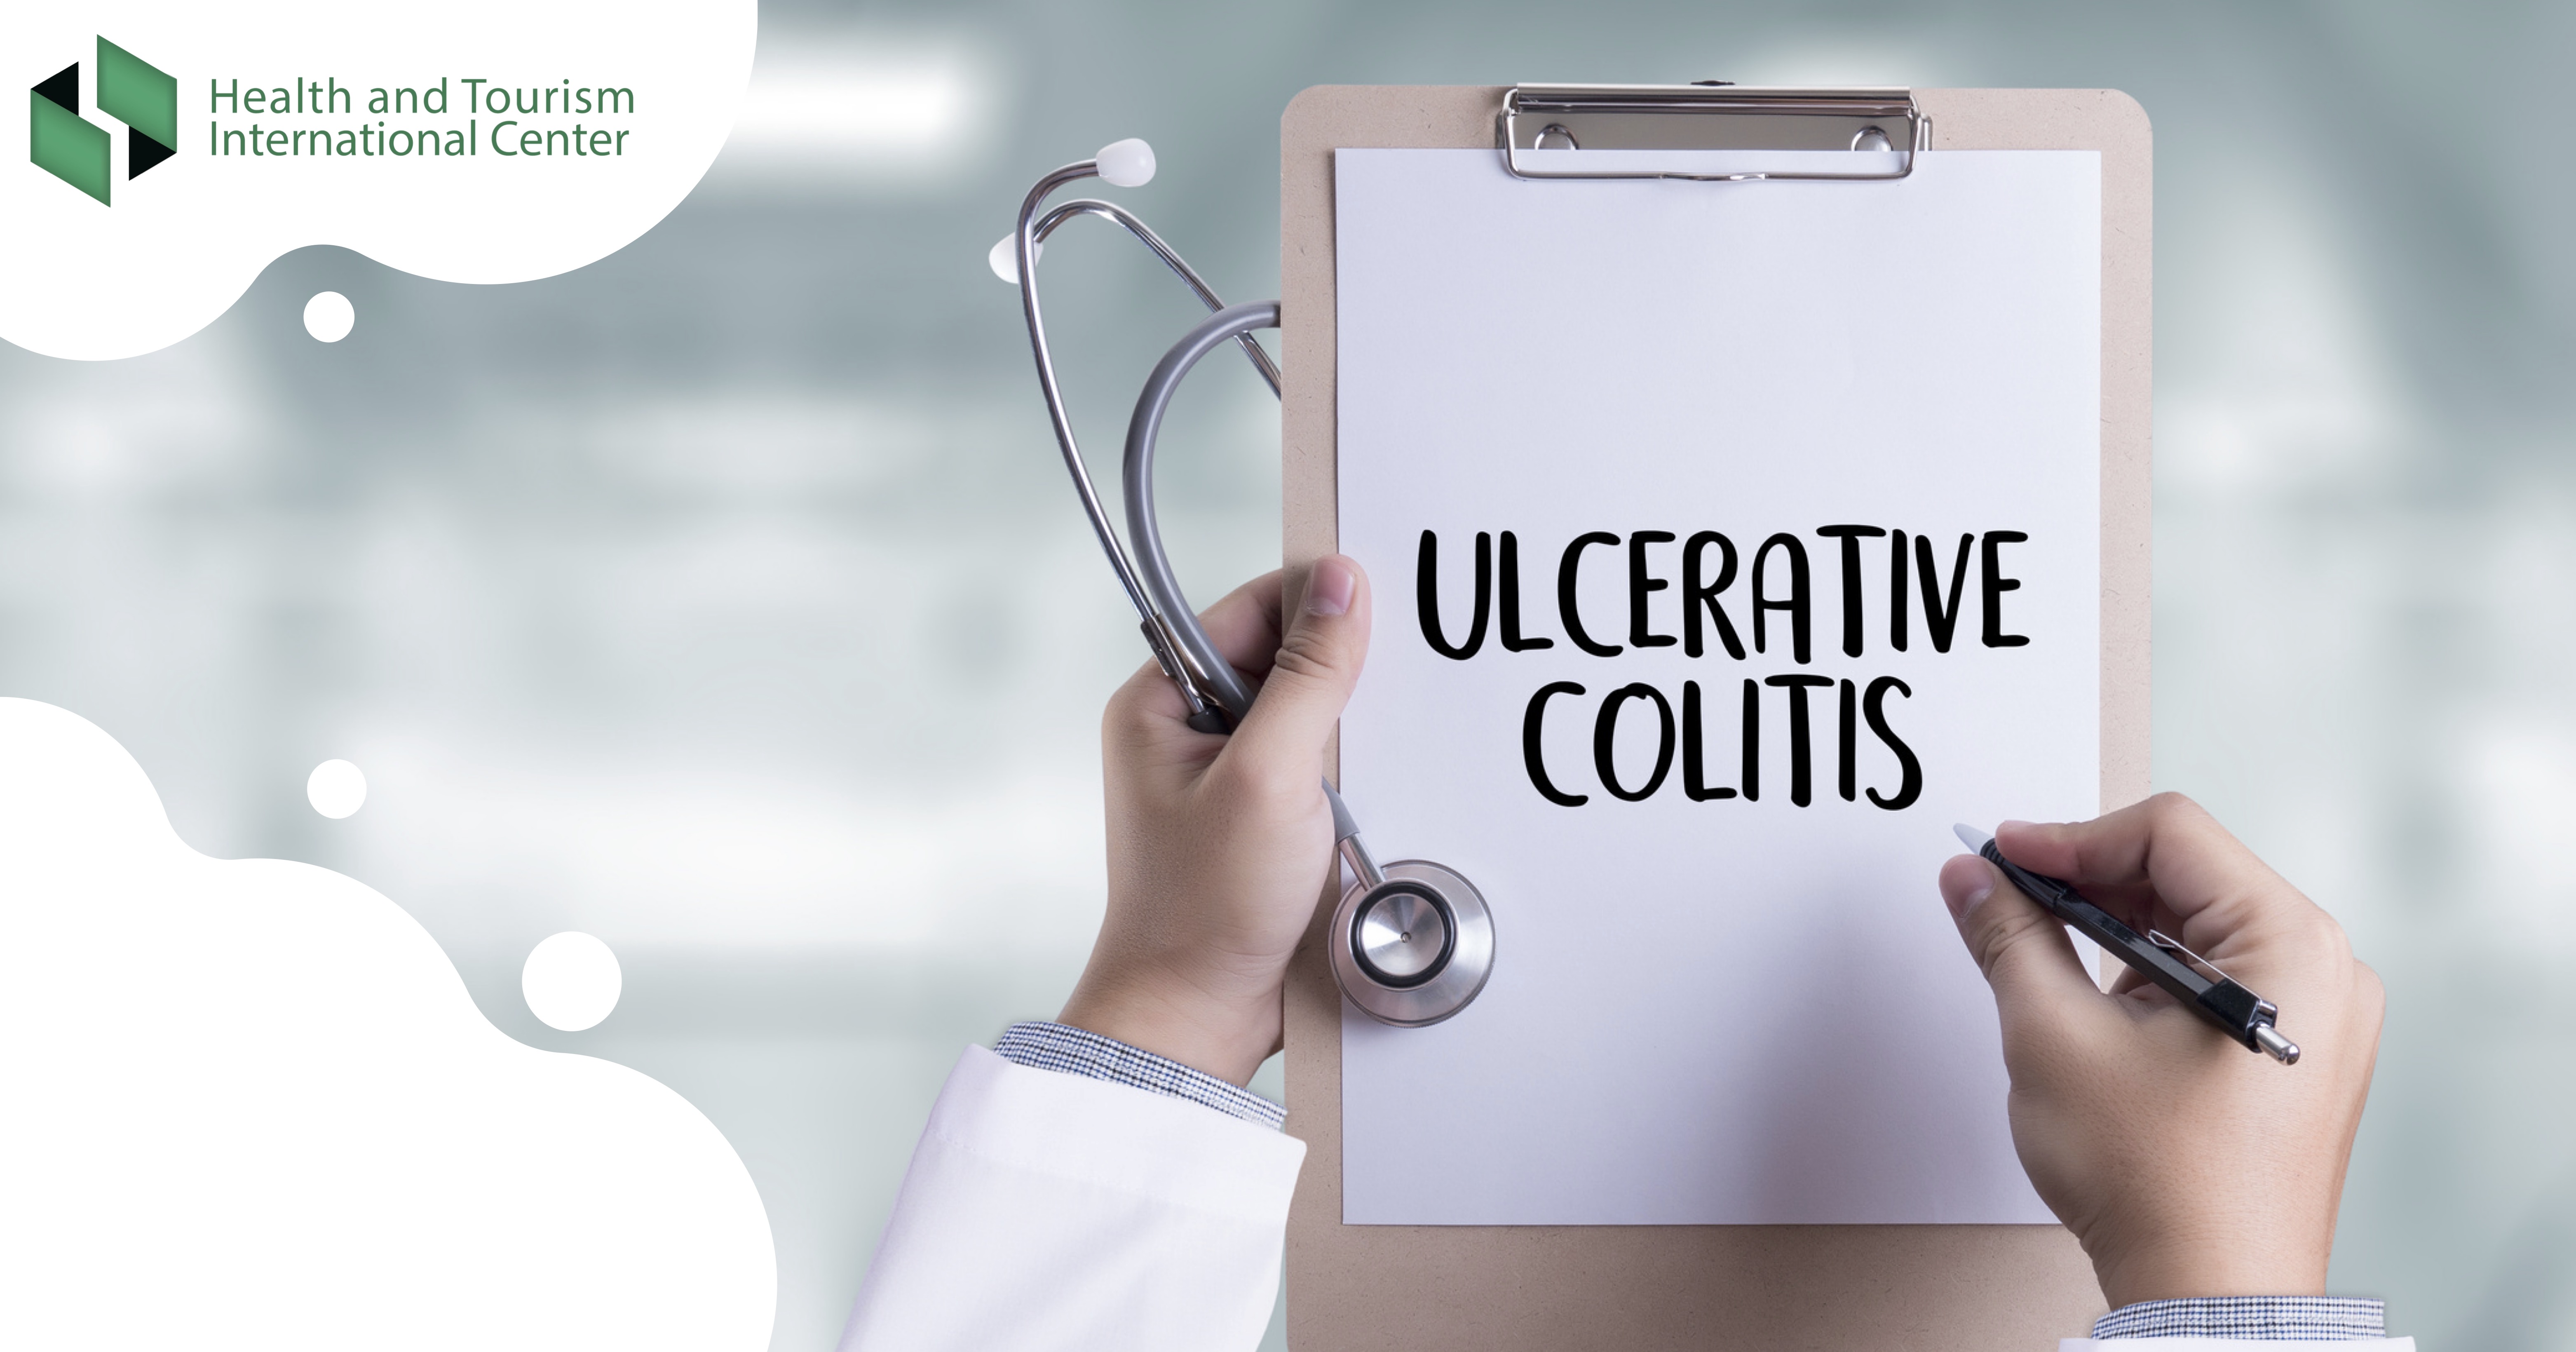 What types of complications does ulcerative colitis cause?